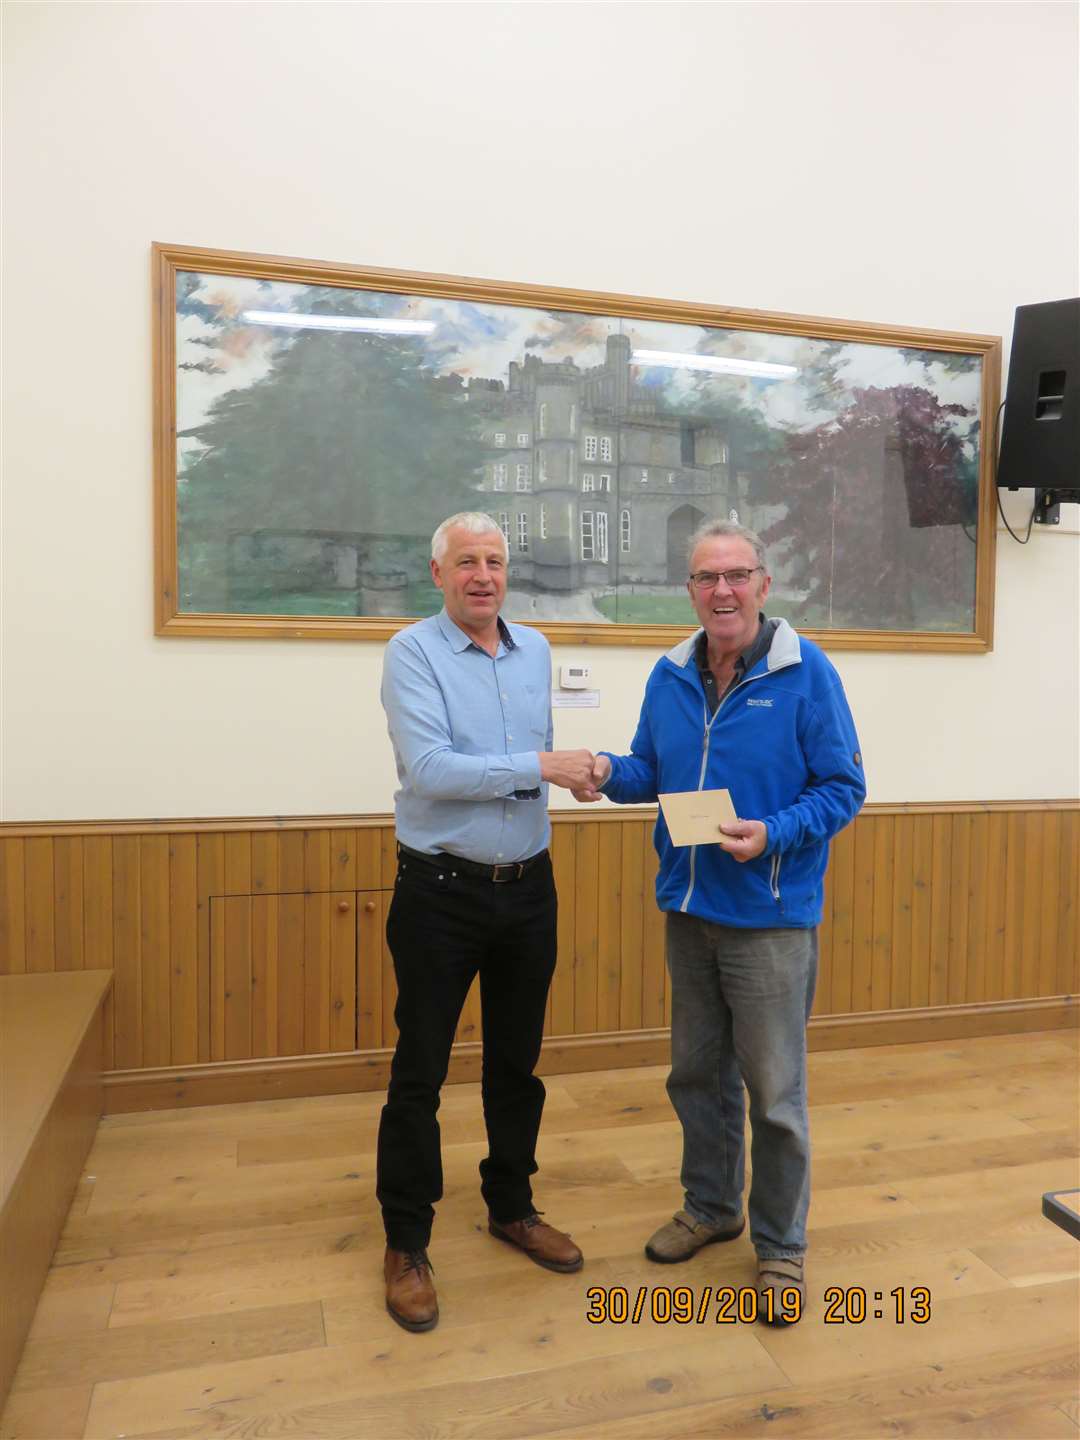 Chairman and fellow Director James Mark presents Peter McWilliam with a gift voucher on his retirement.